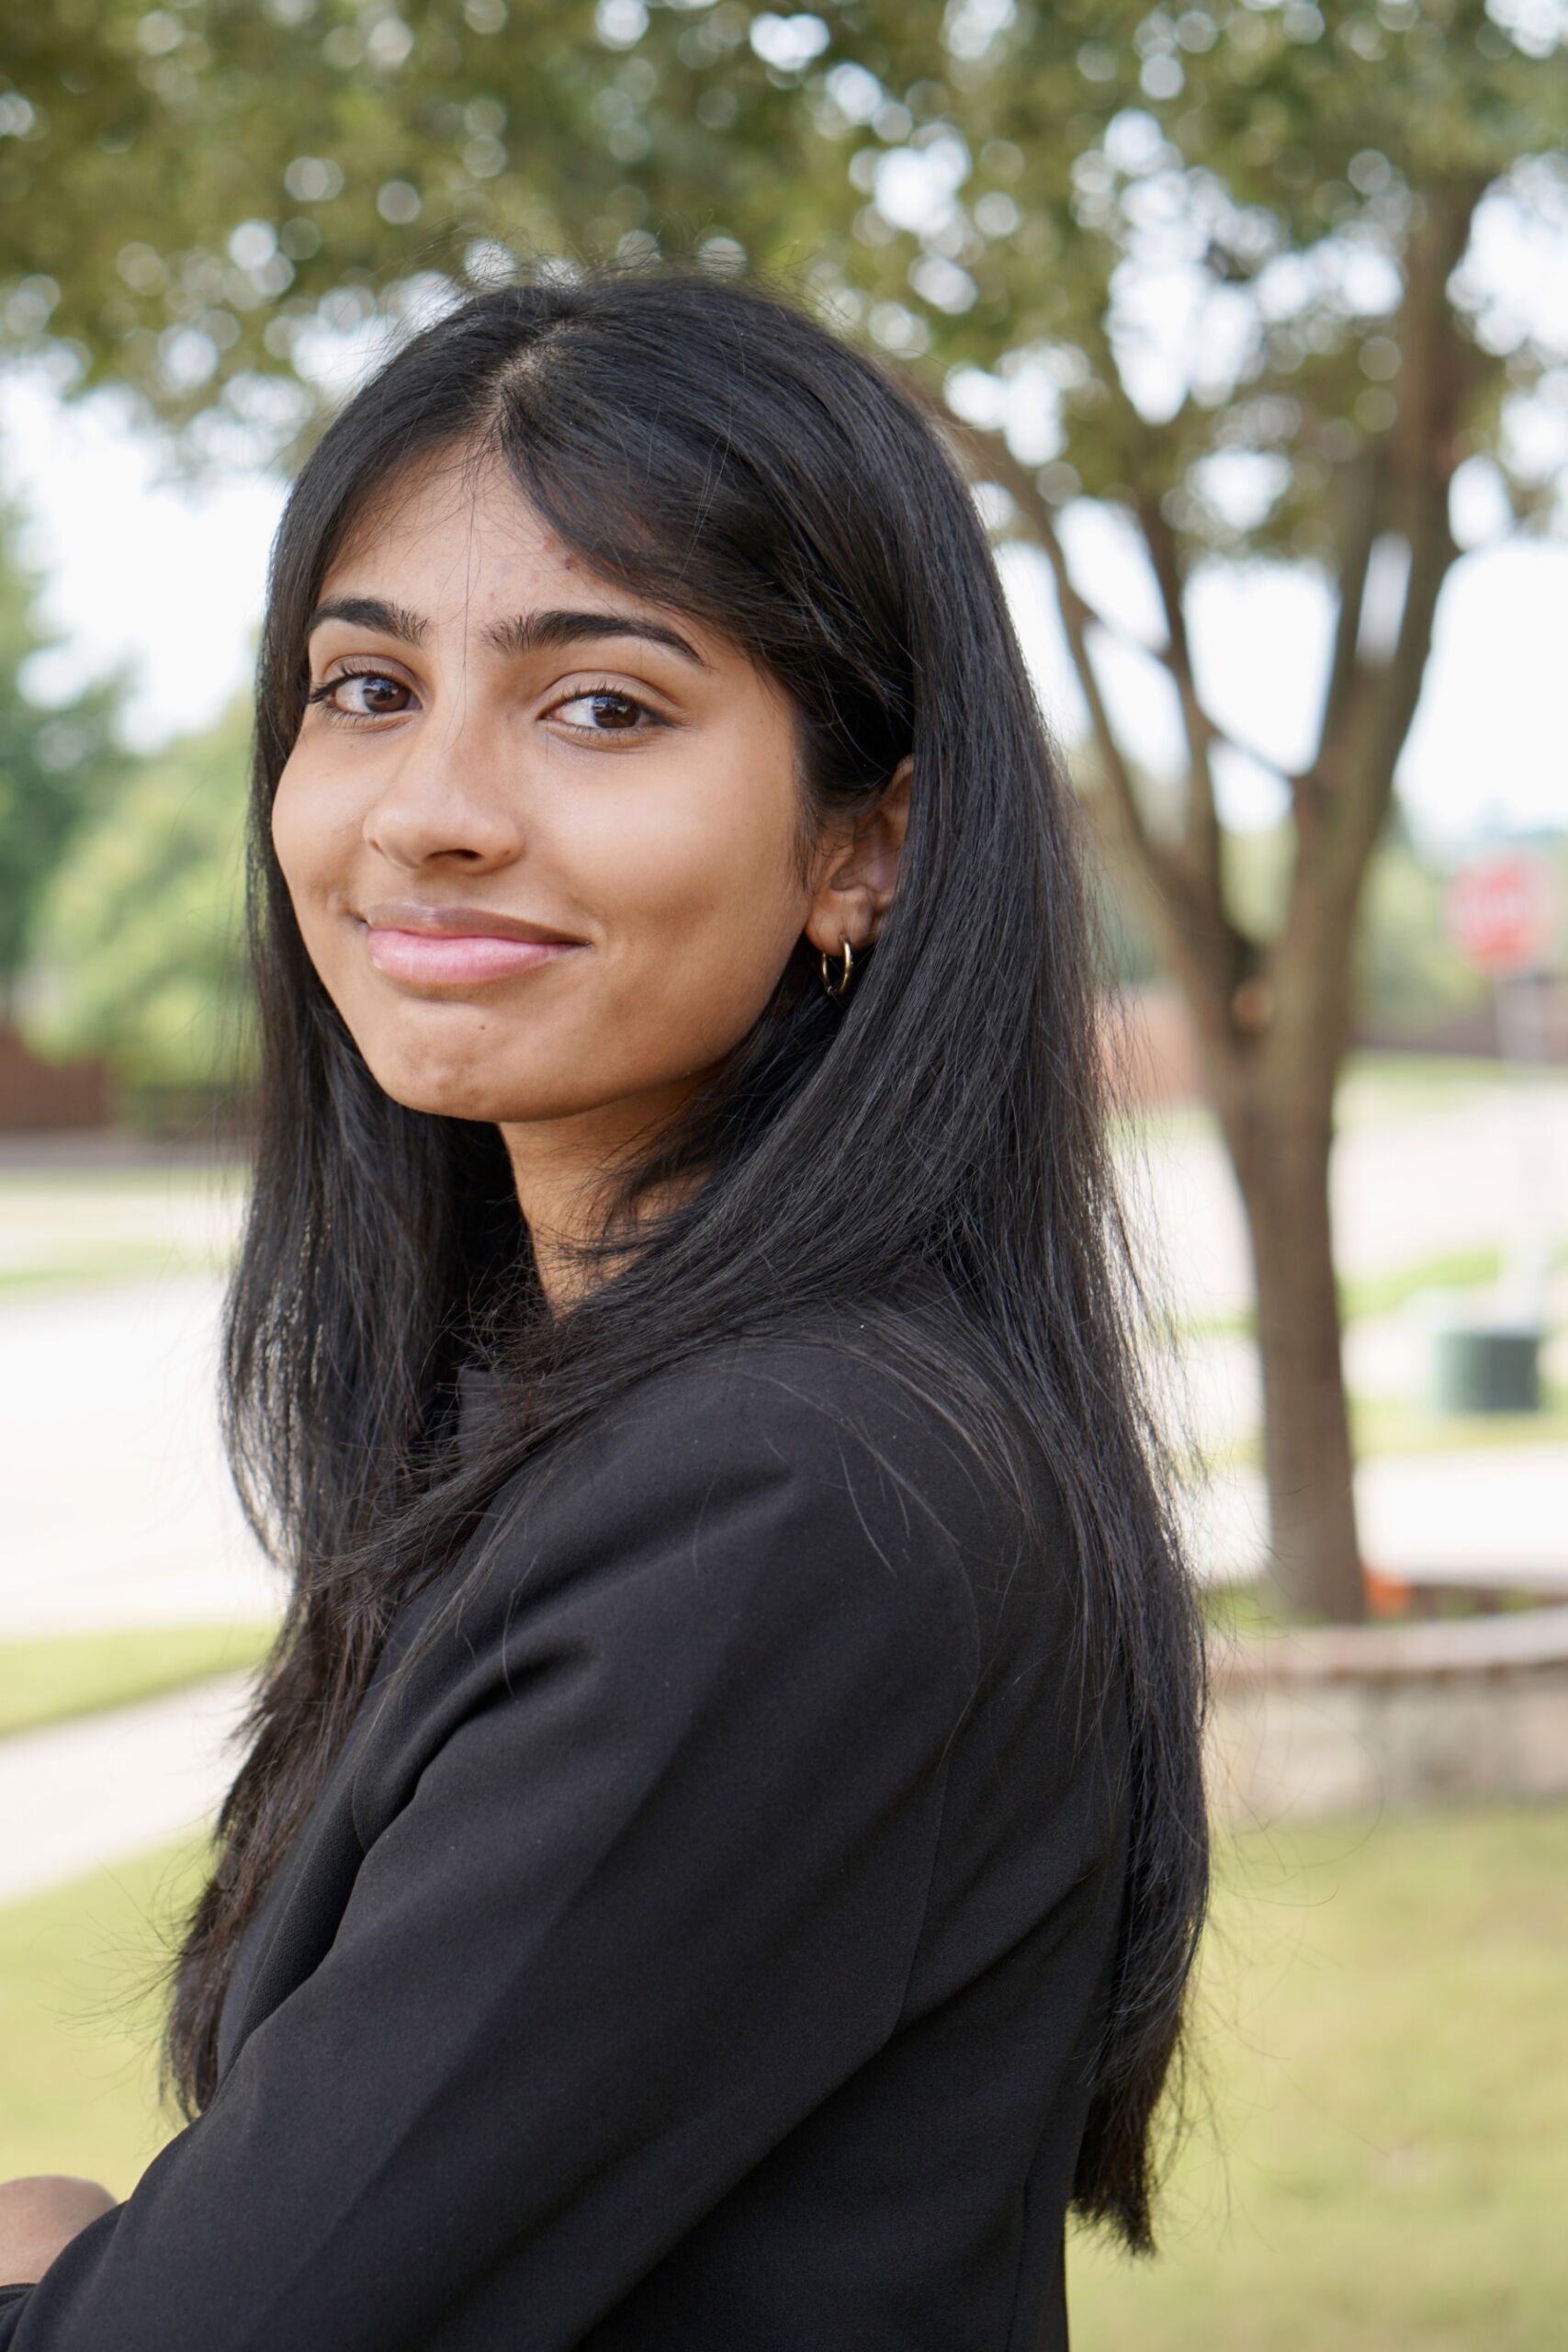 Sneha facing away from the camera and smiling while wearing a black shirt.